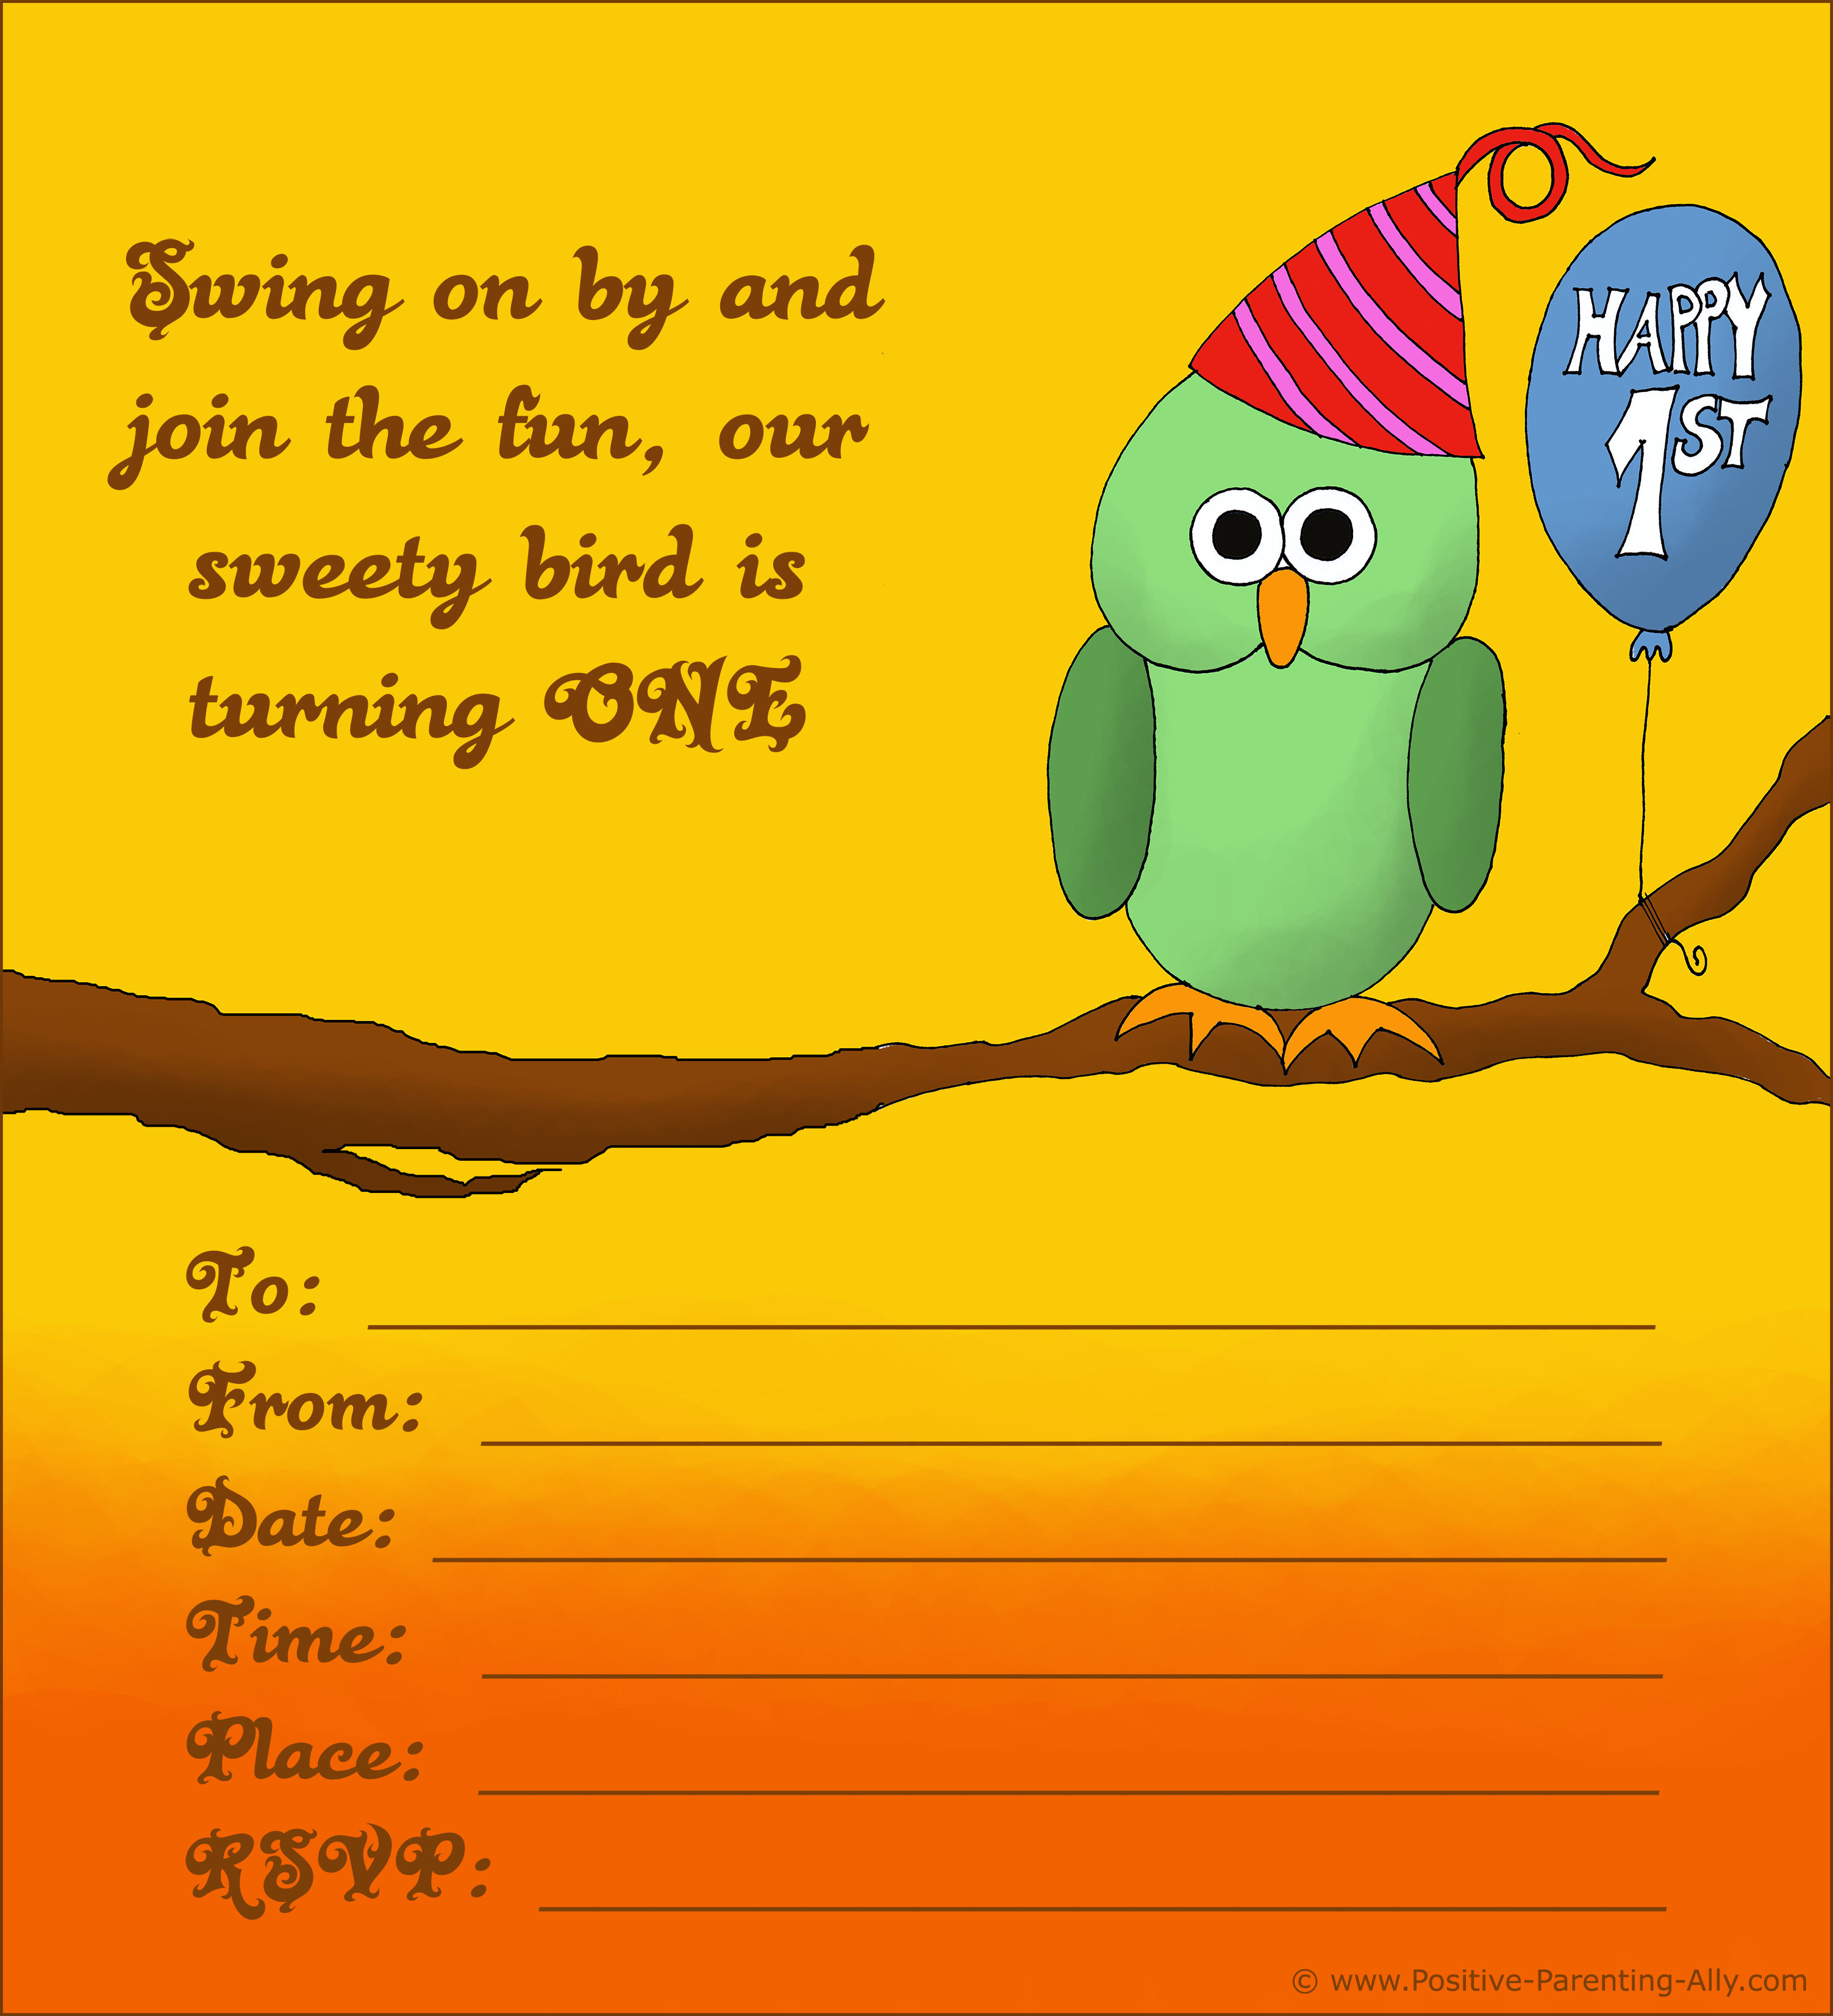 Cute owl for smart kids - free birthday invite all ready to print.